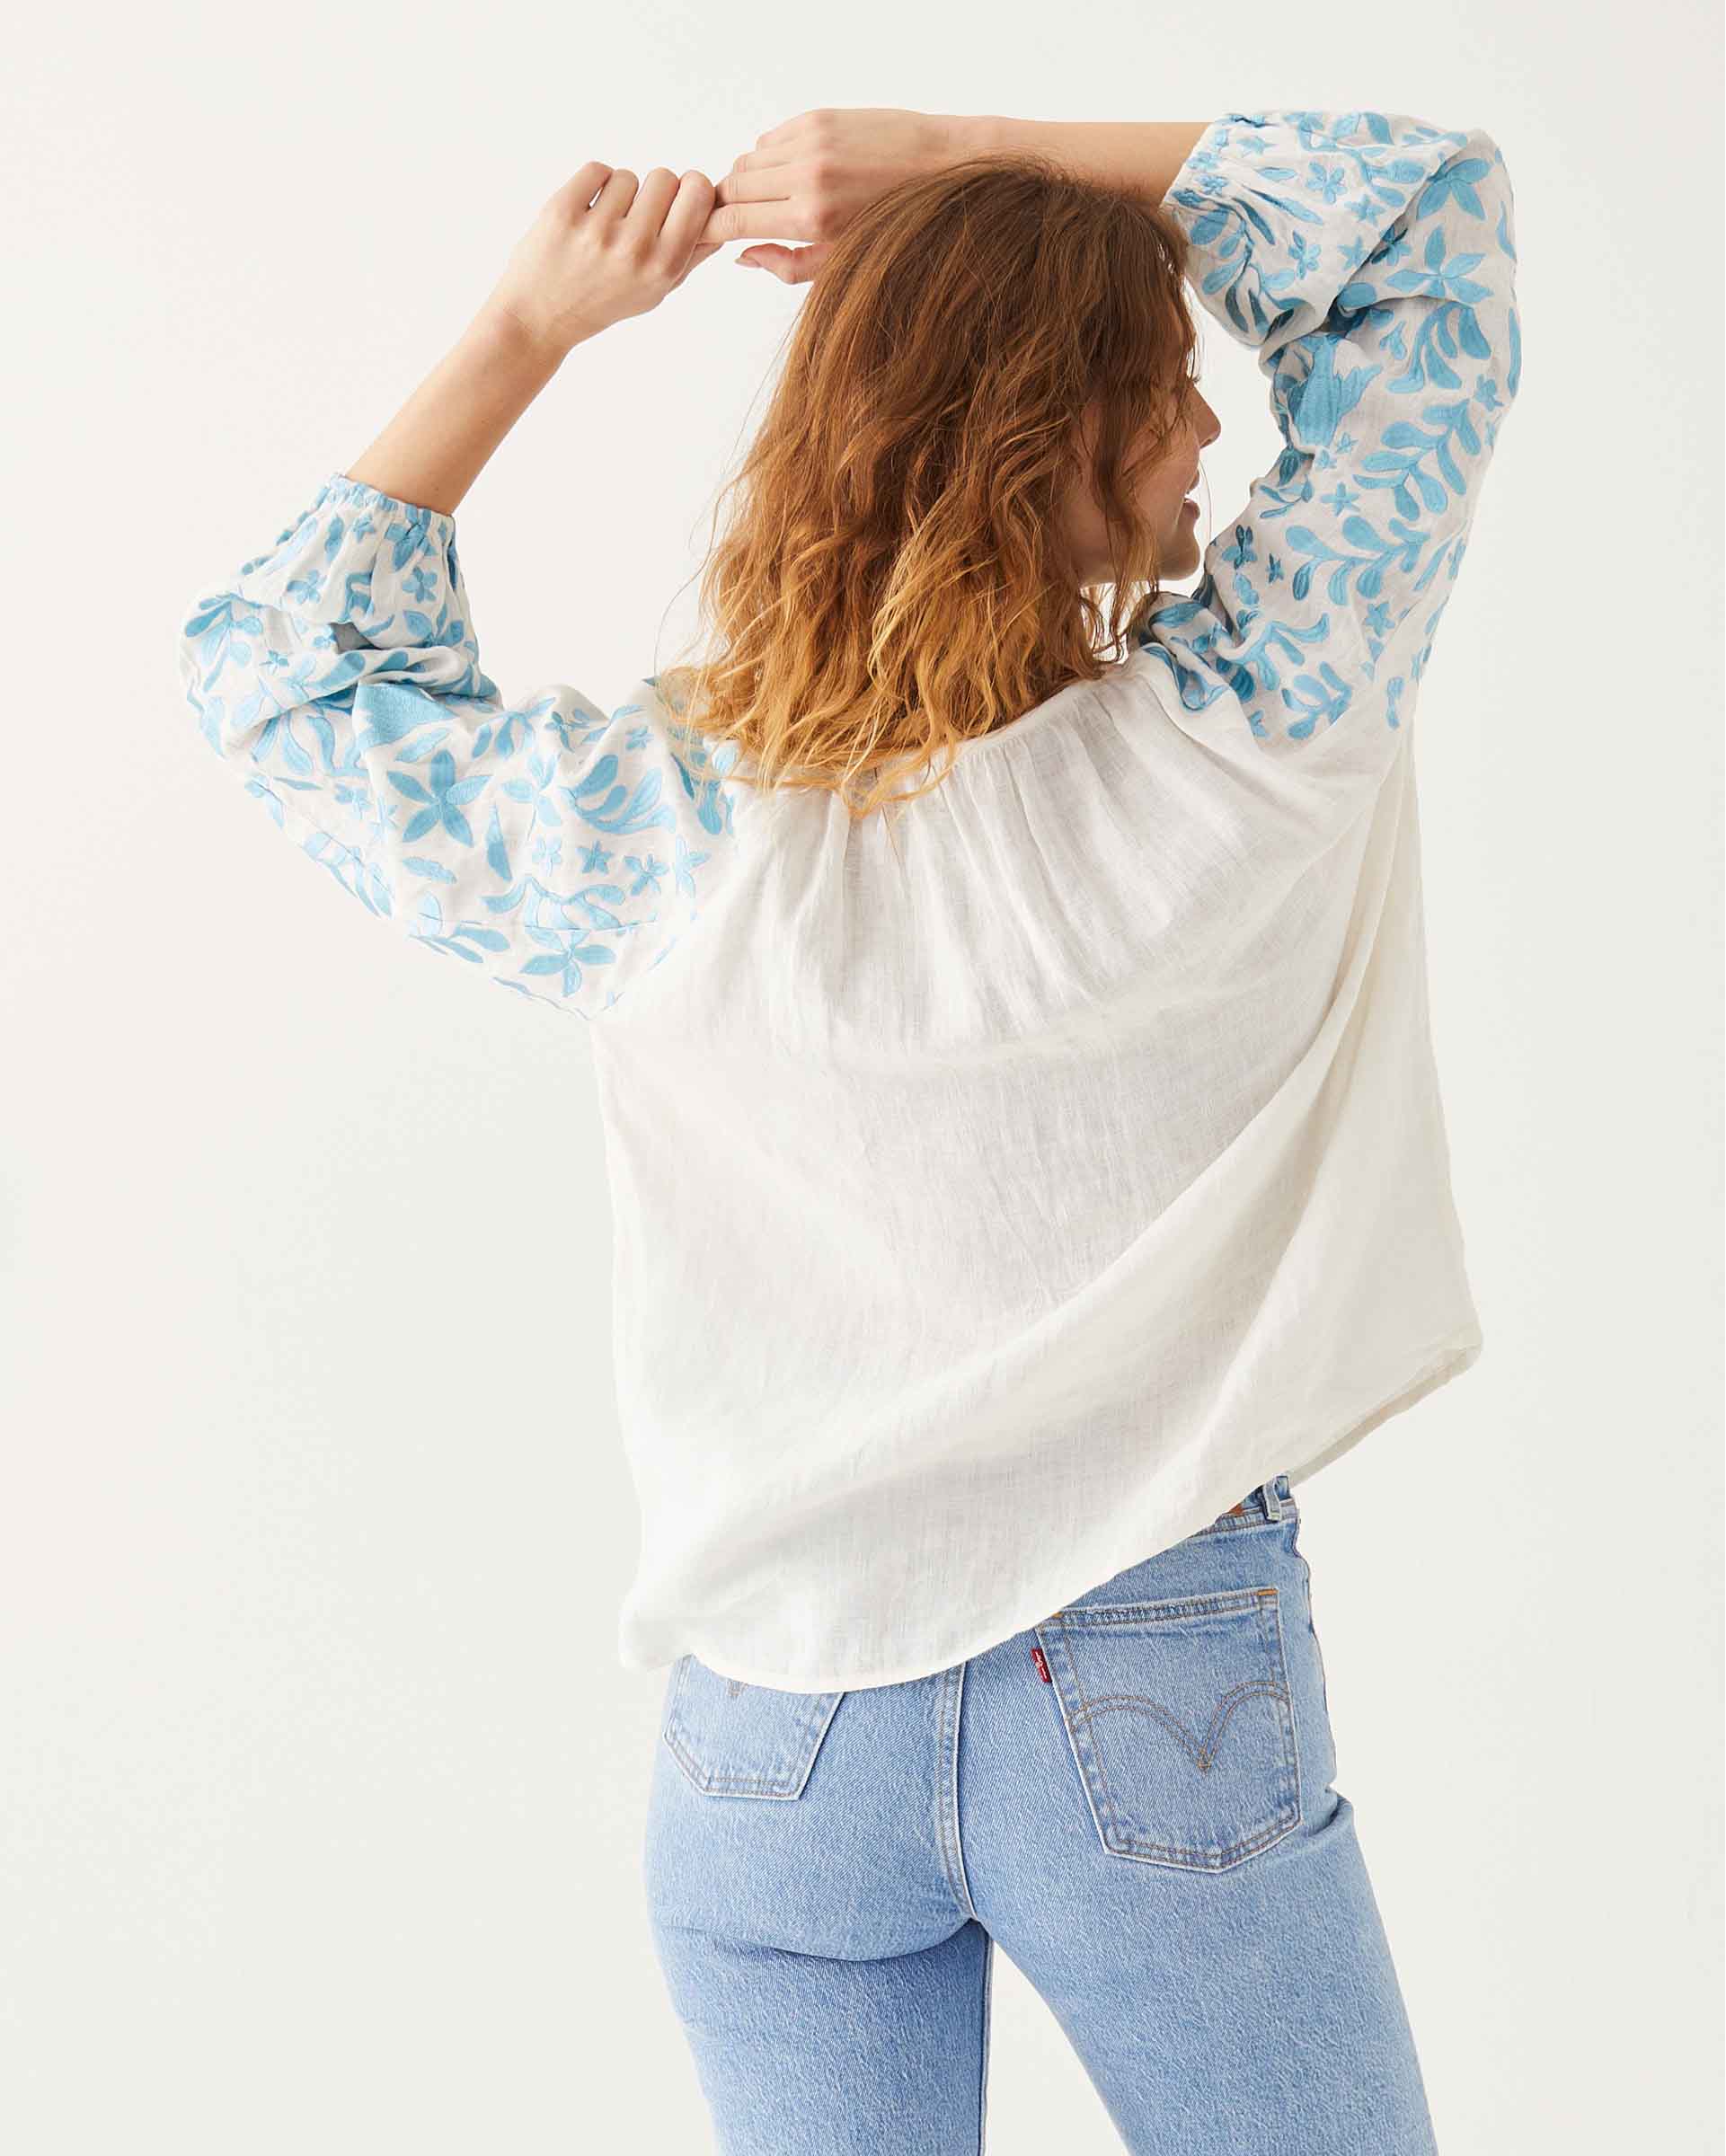 female wearing white and blue embroidered blouse with vines and birds backwards on white background